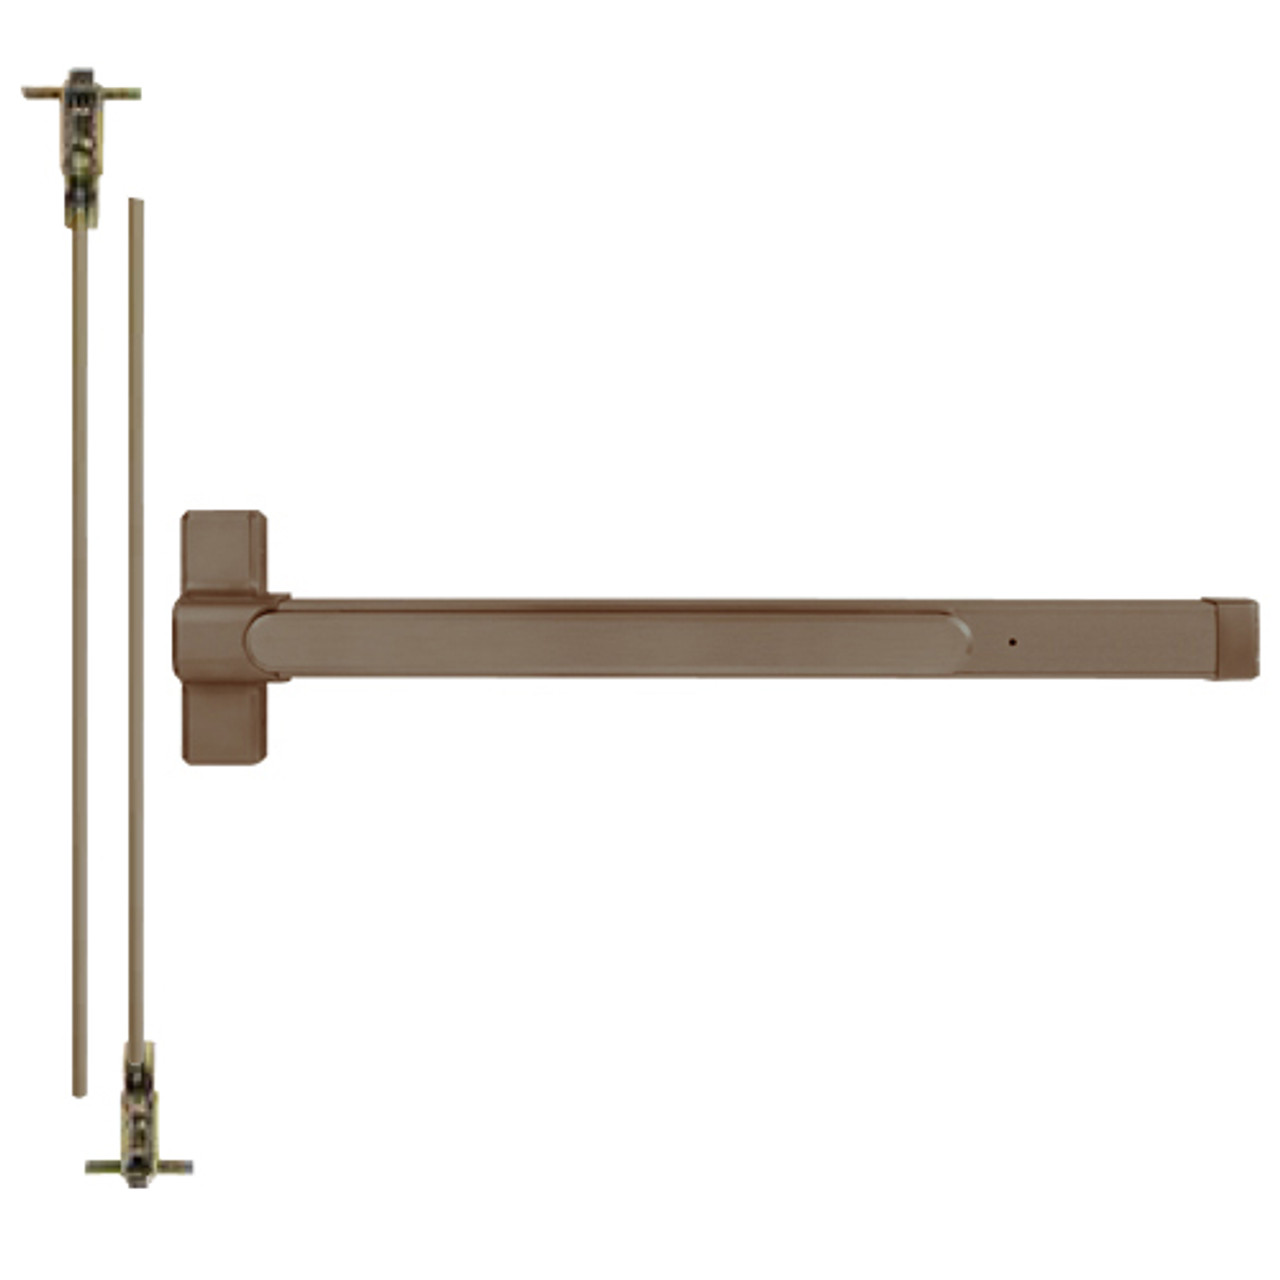 QED126LR-36-7-313AN Stanley QED100 Series Heavy Duty Concealed Vertical Rod Fire Rated Exit Device in Anodized Duranodic Bronze Finish